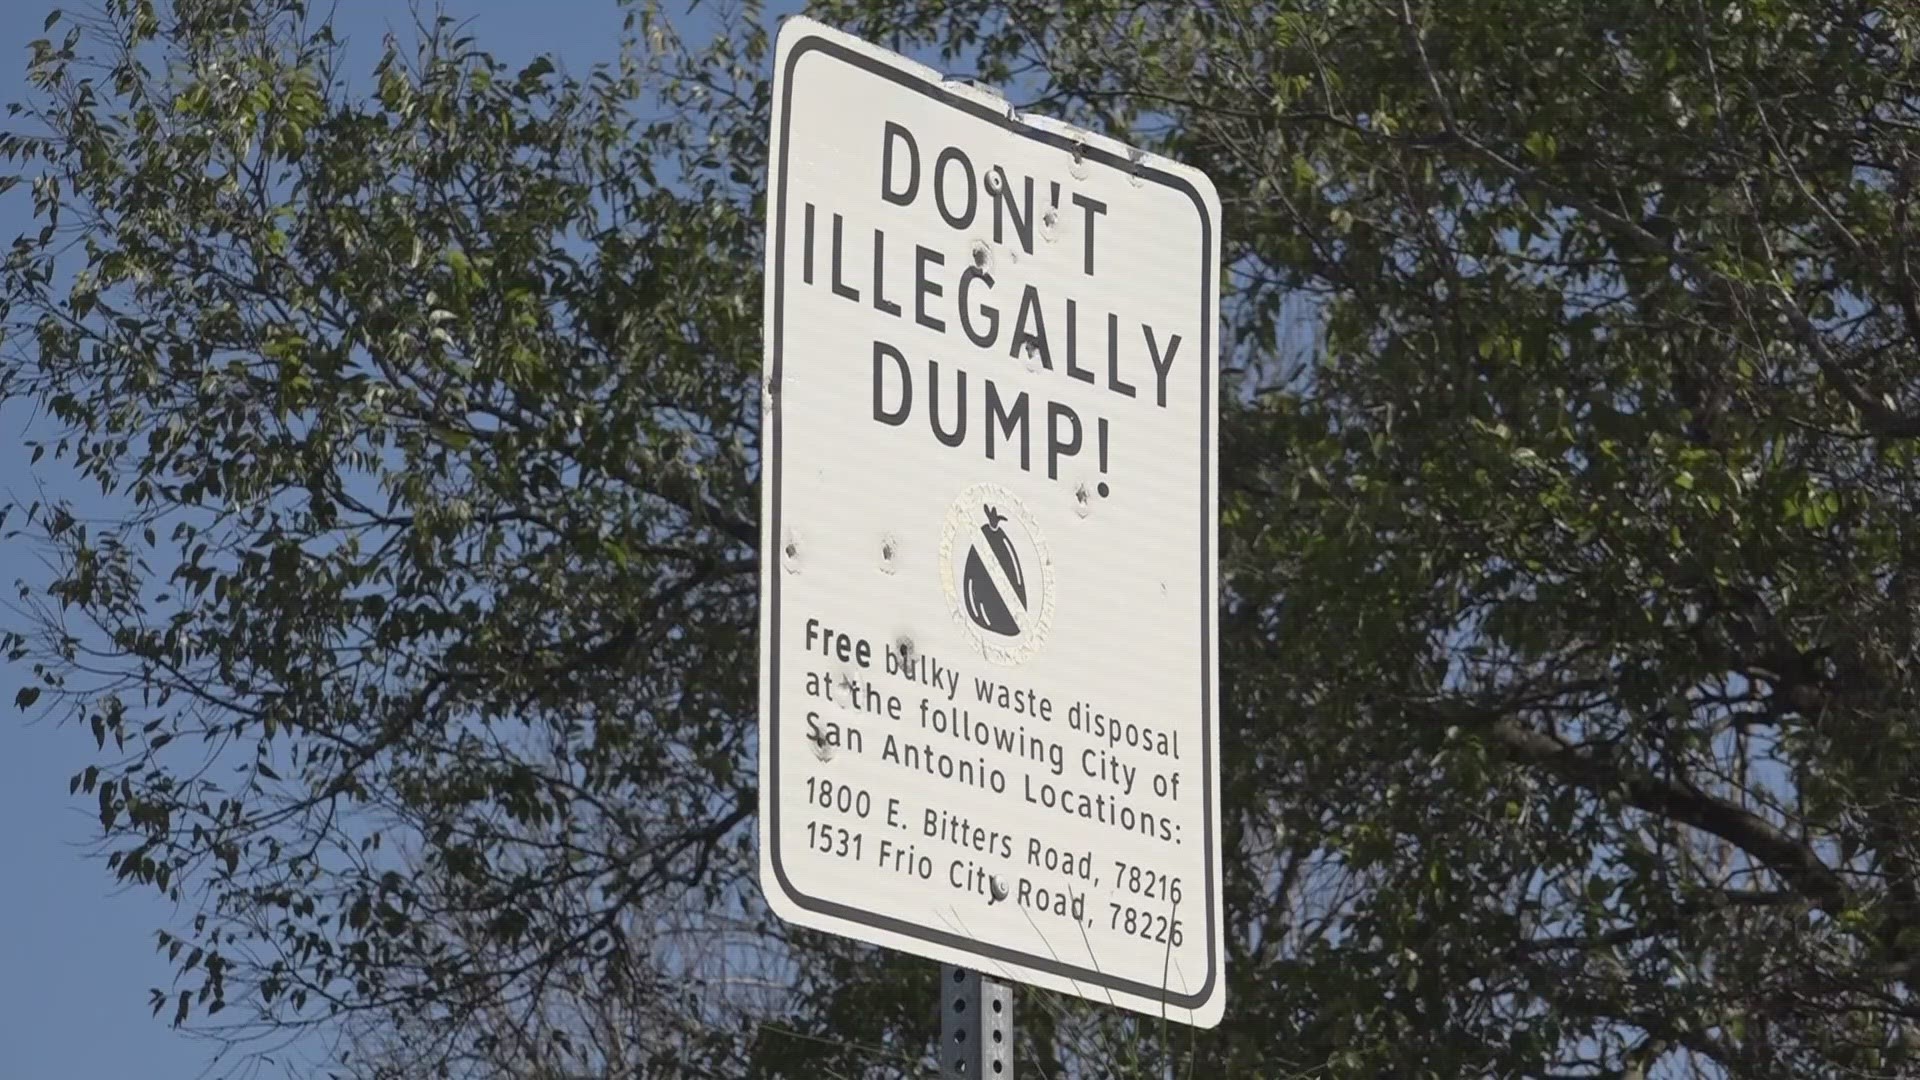 Local residents frustrated with the illegal dumping issue in San Antonio